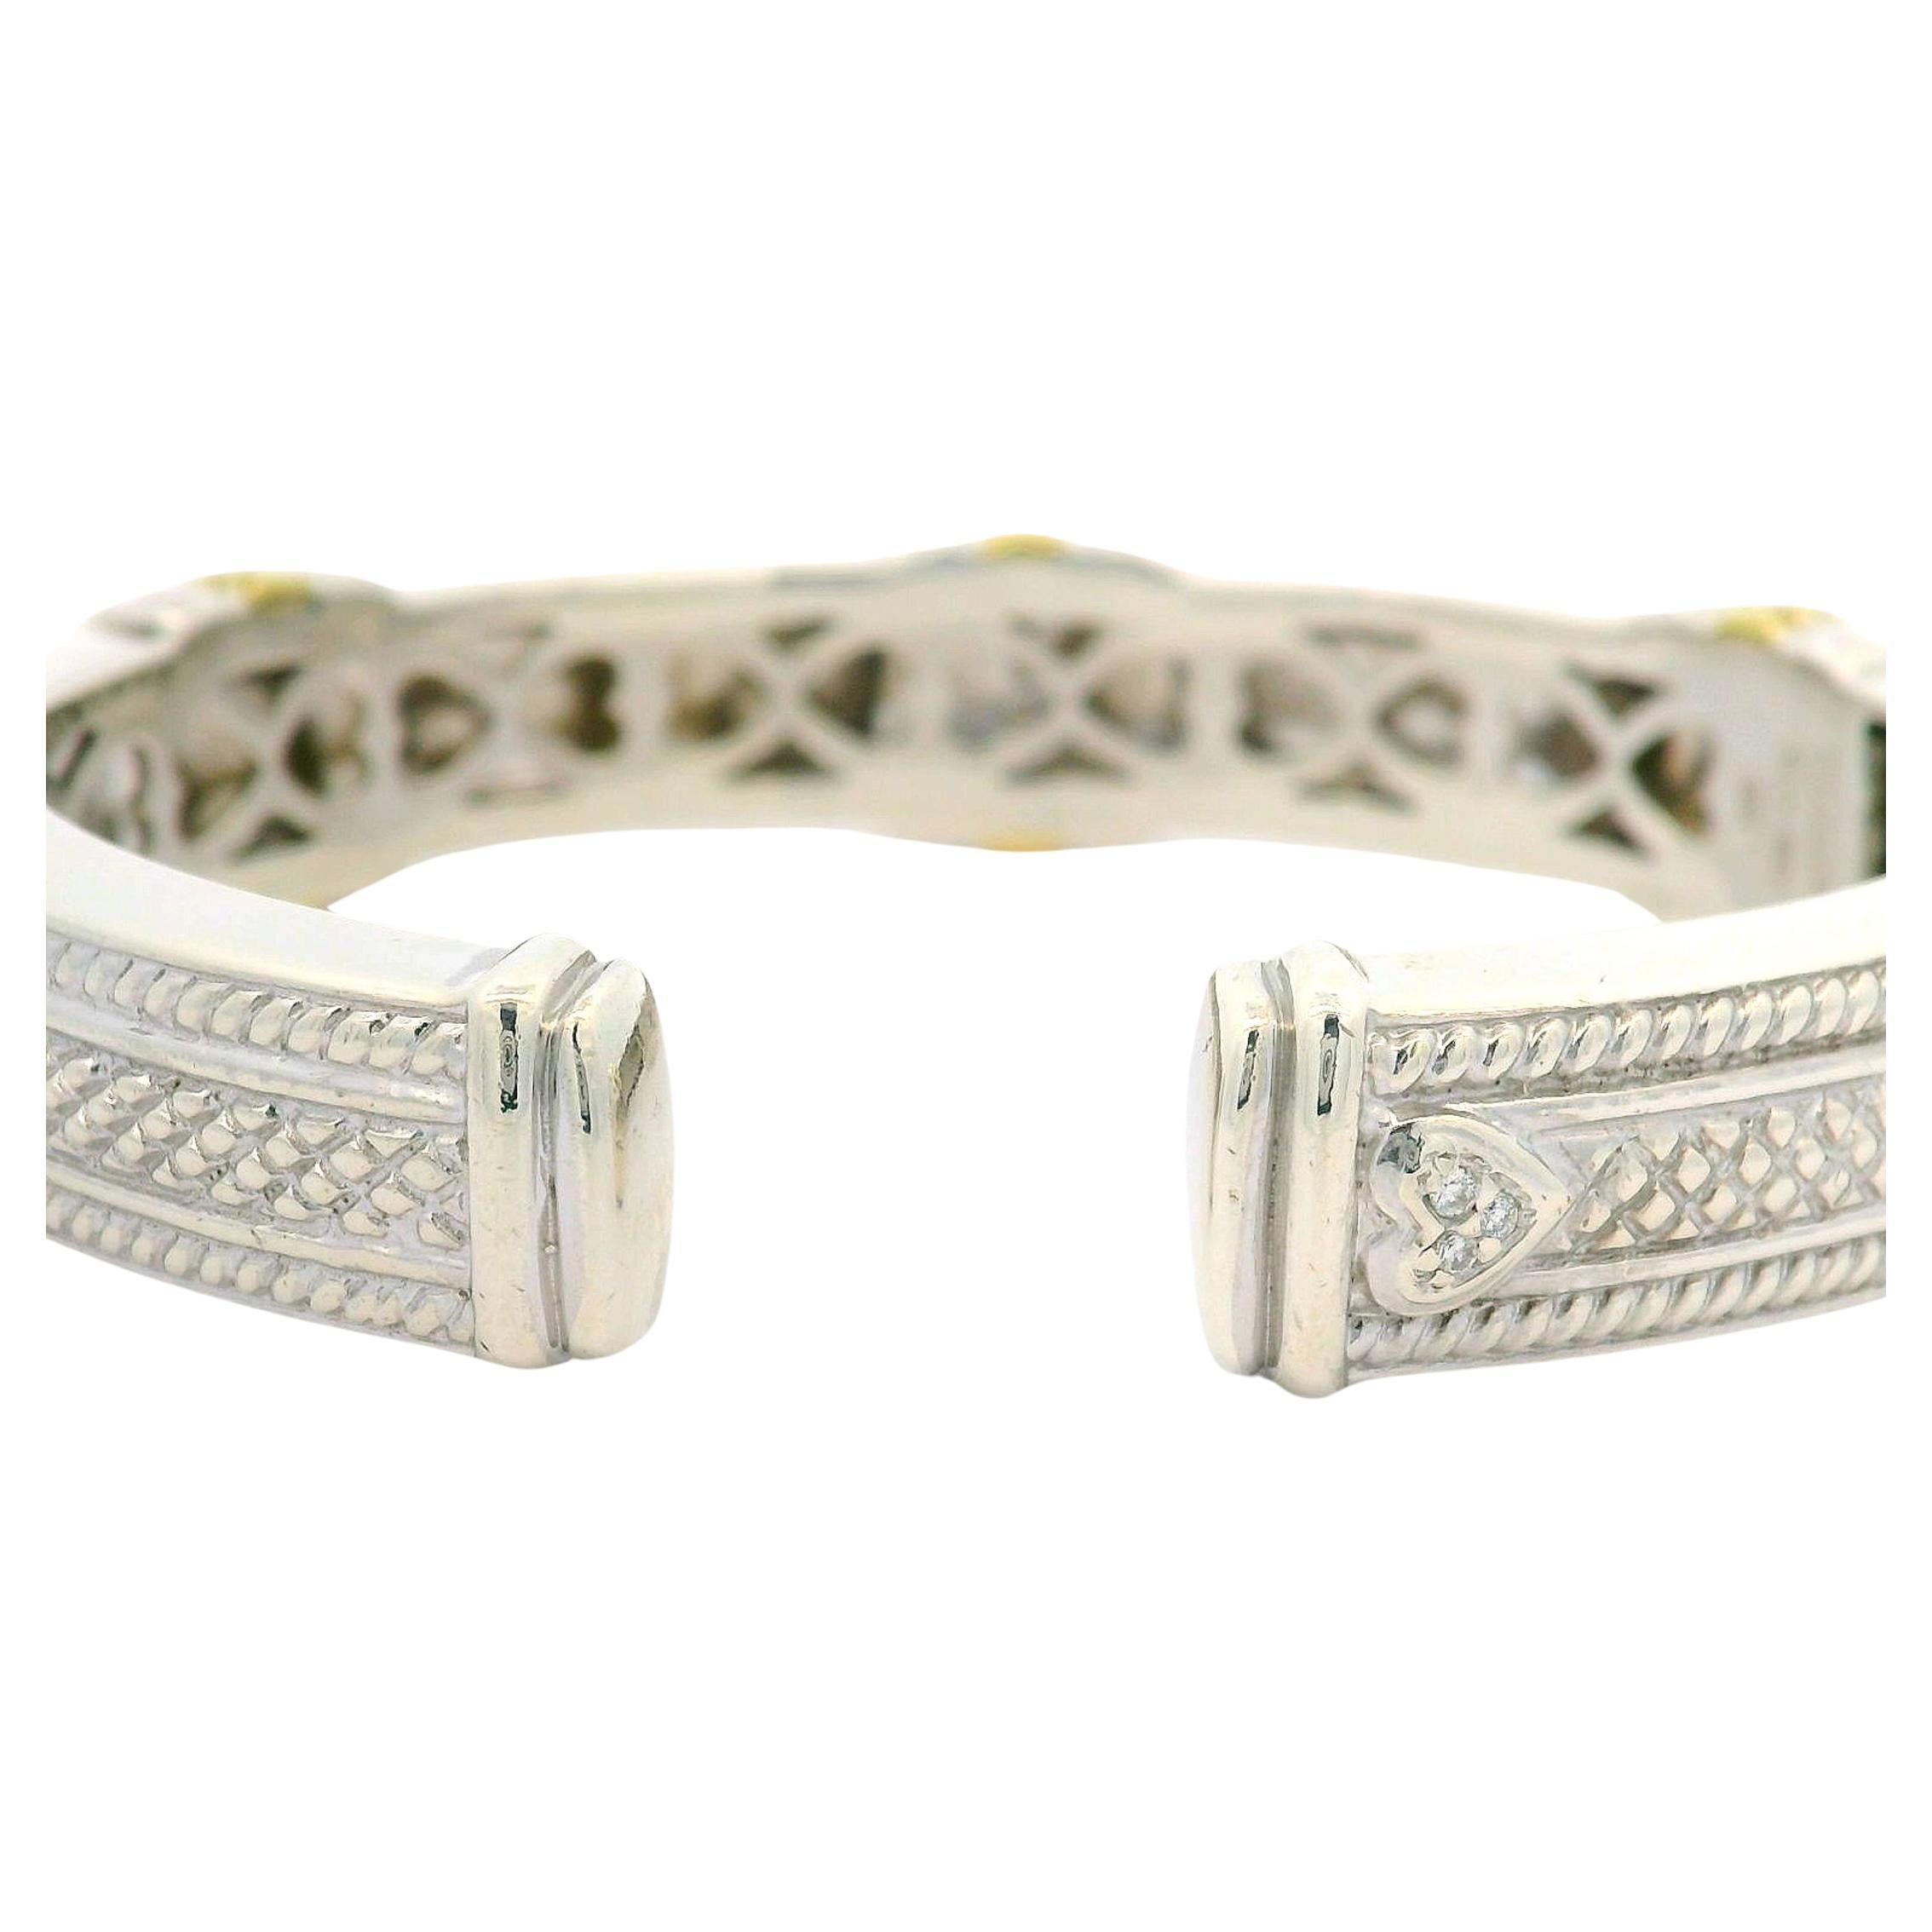 –Stone(s)–
(4) Natural Genuine Diamonds - Round Brilliant Cut - Pave Set - VS1/VS2 Clarity - G/H Color - 0.12ctw (approx.)

Material: Sterling Silver .925 - 18k Yellow Gold
Weight: 43.5 Grams
Type: Hinged Open Cuff Bangle Bracelet
Length: Will